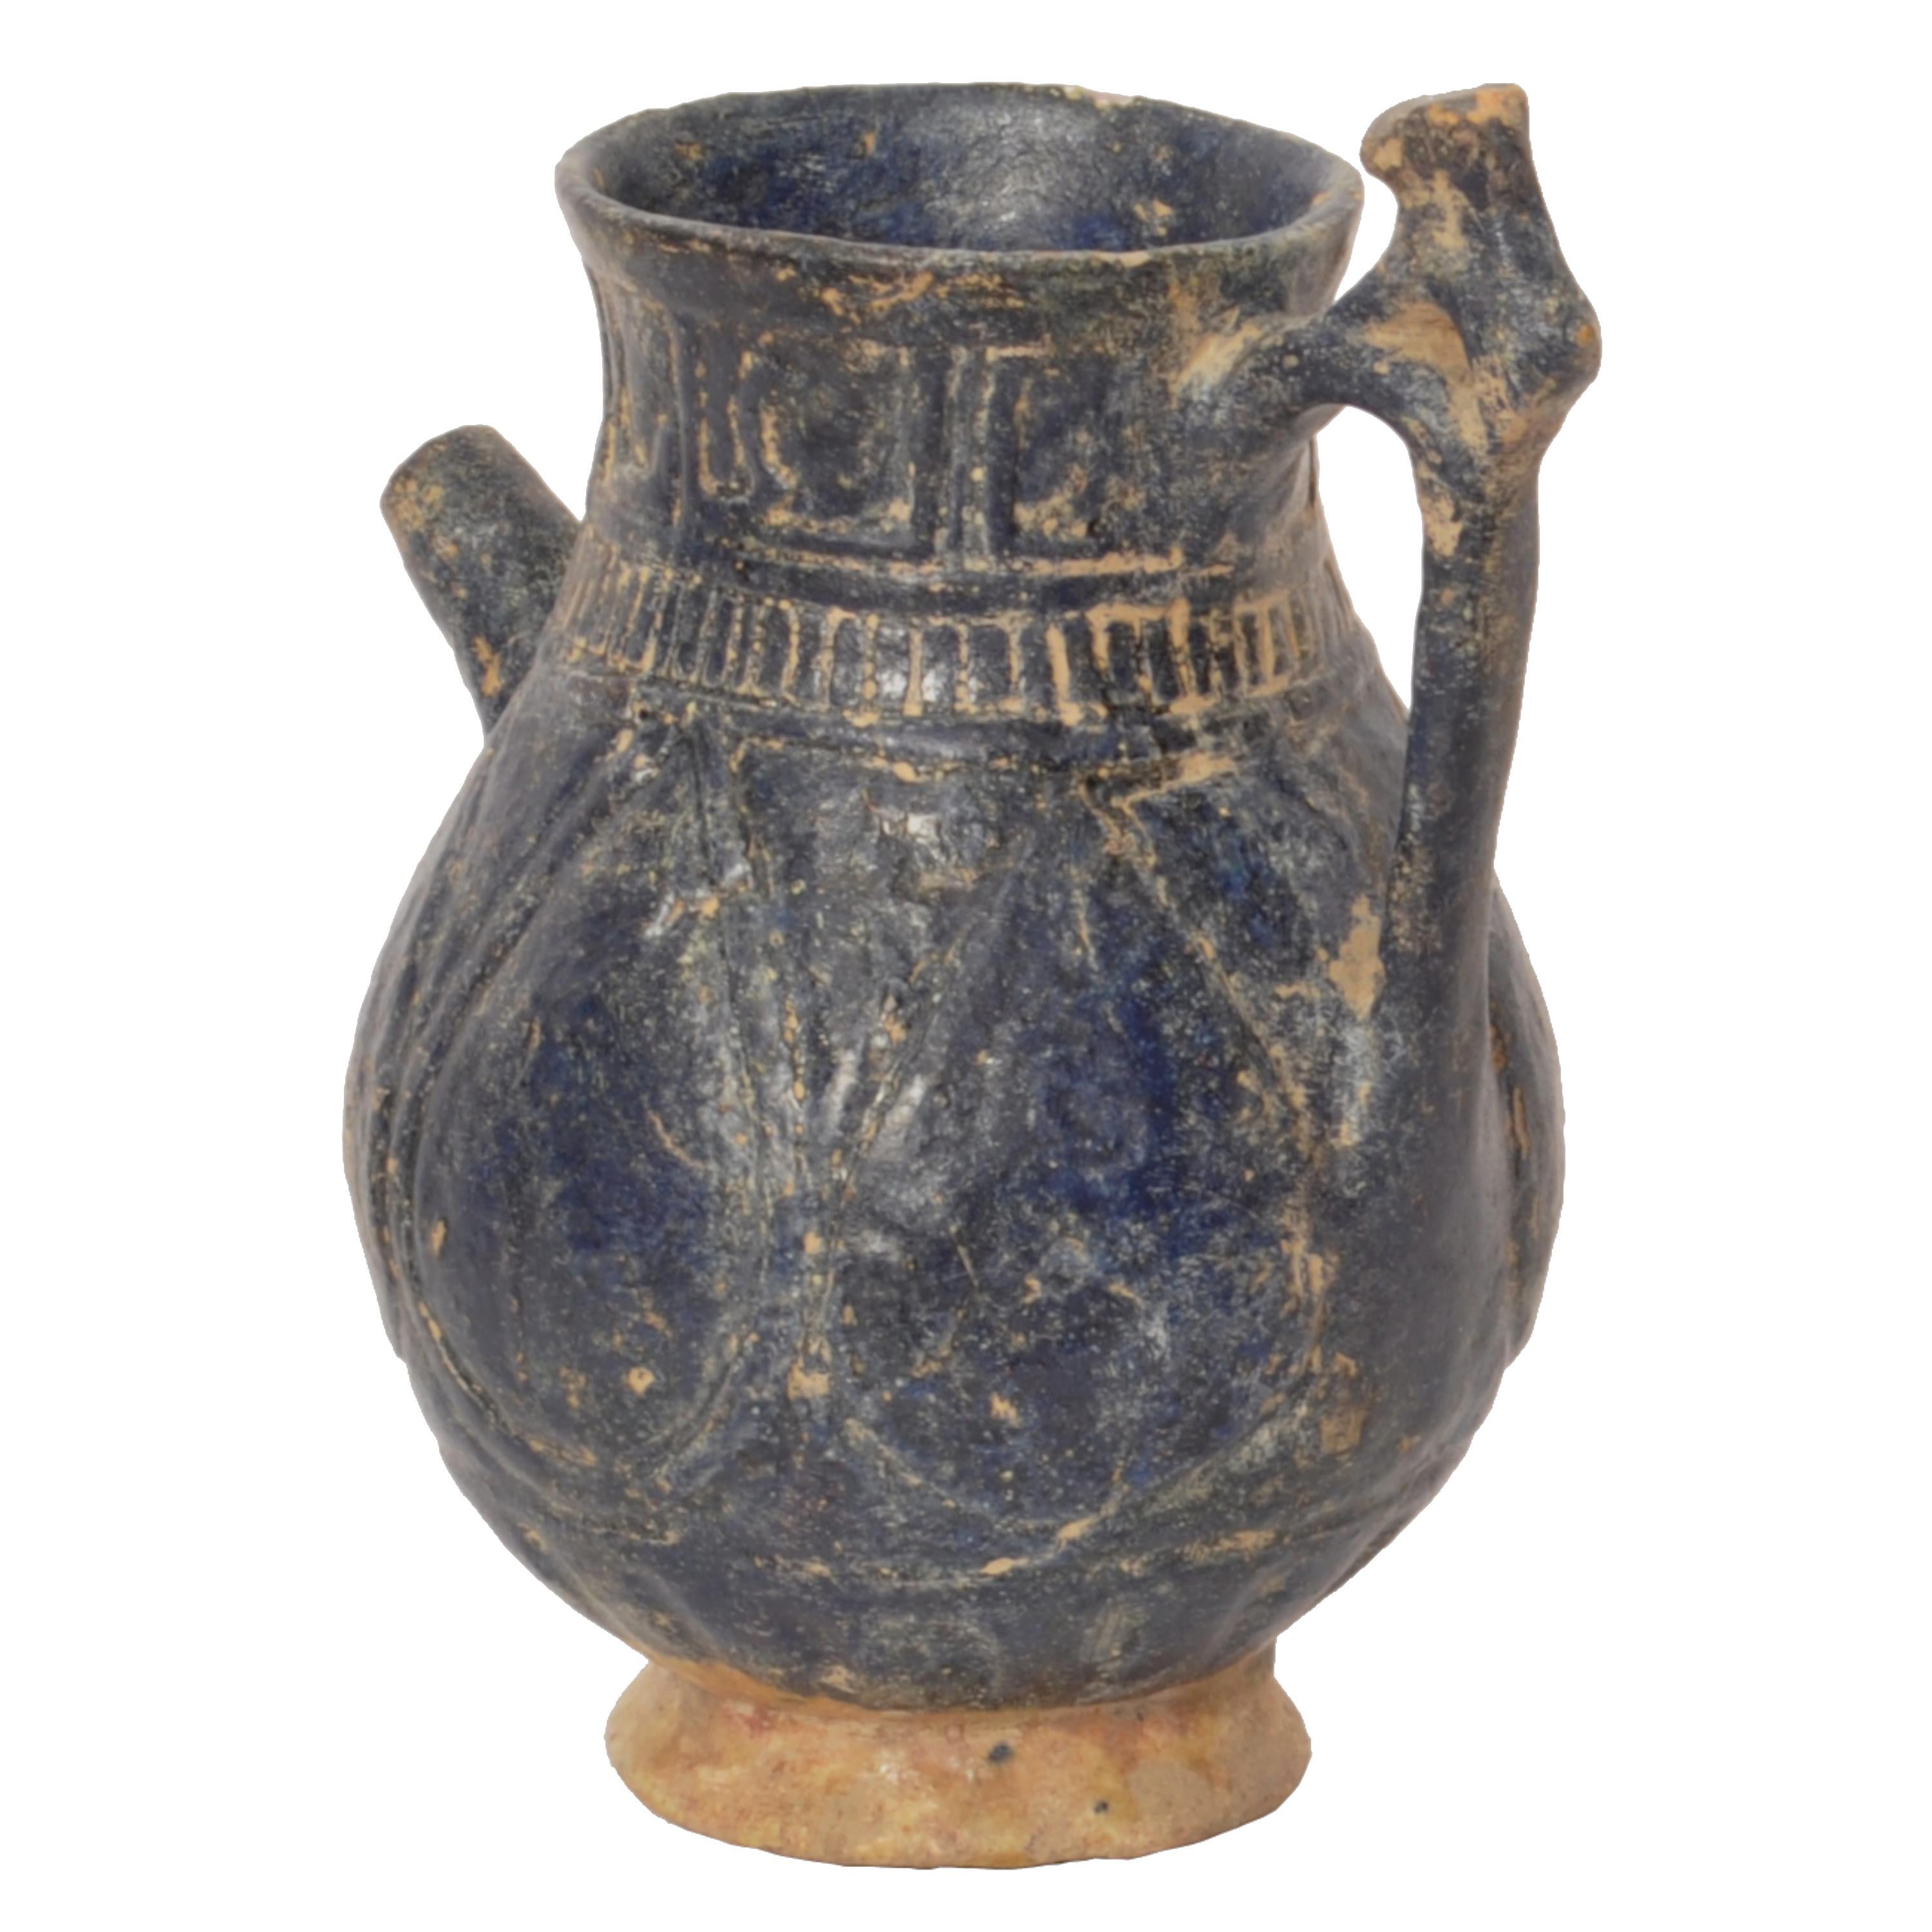 A rare ancient Persian totally intact 12th/13th Century Islamic vessel/jug, from Khorasan.
The vessel with a deep blue glaze and having a band of incised Islamic caligraphy to the top, the baluster shaped body decorated with incised 'teardrop'